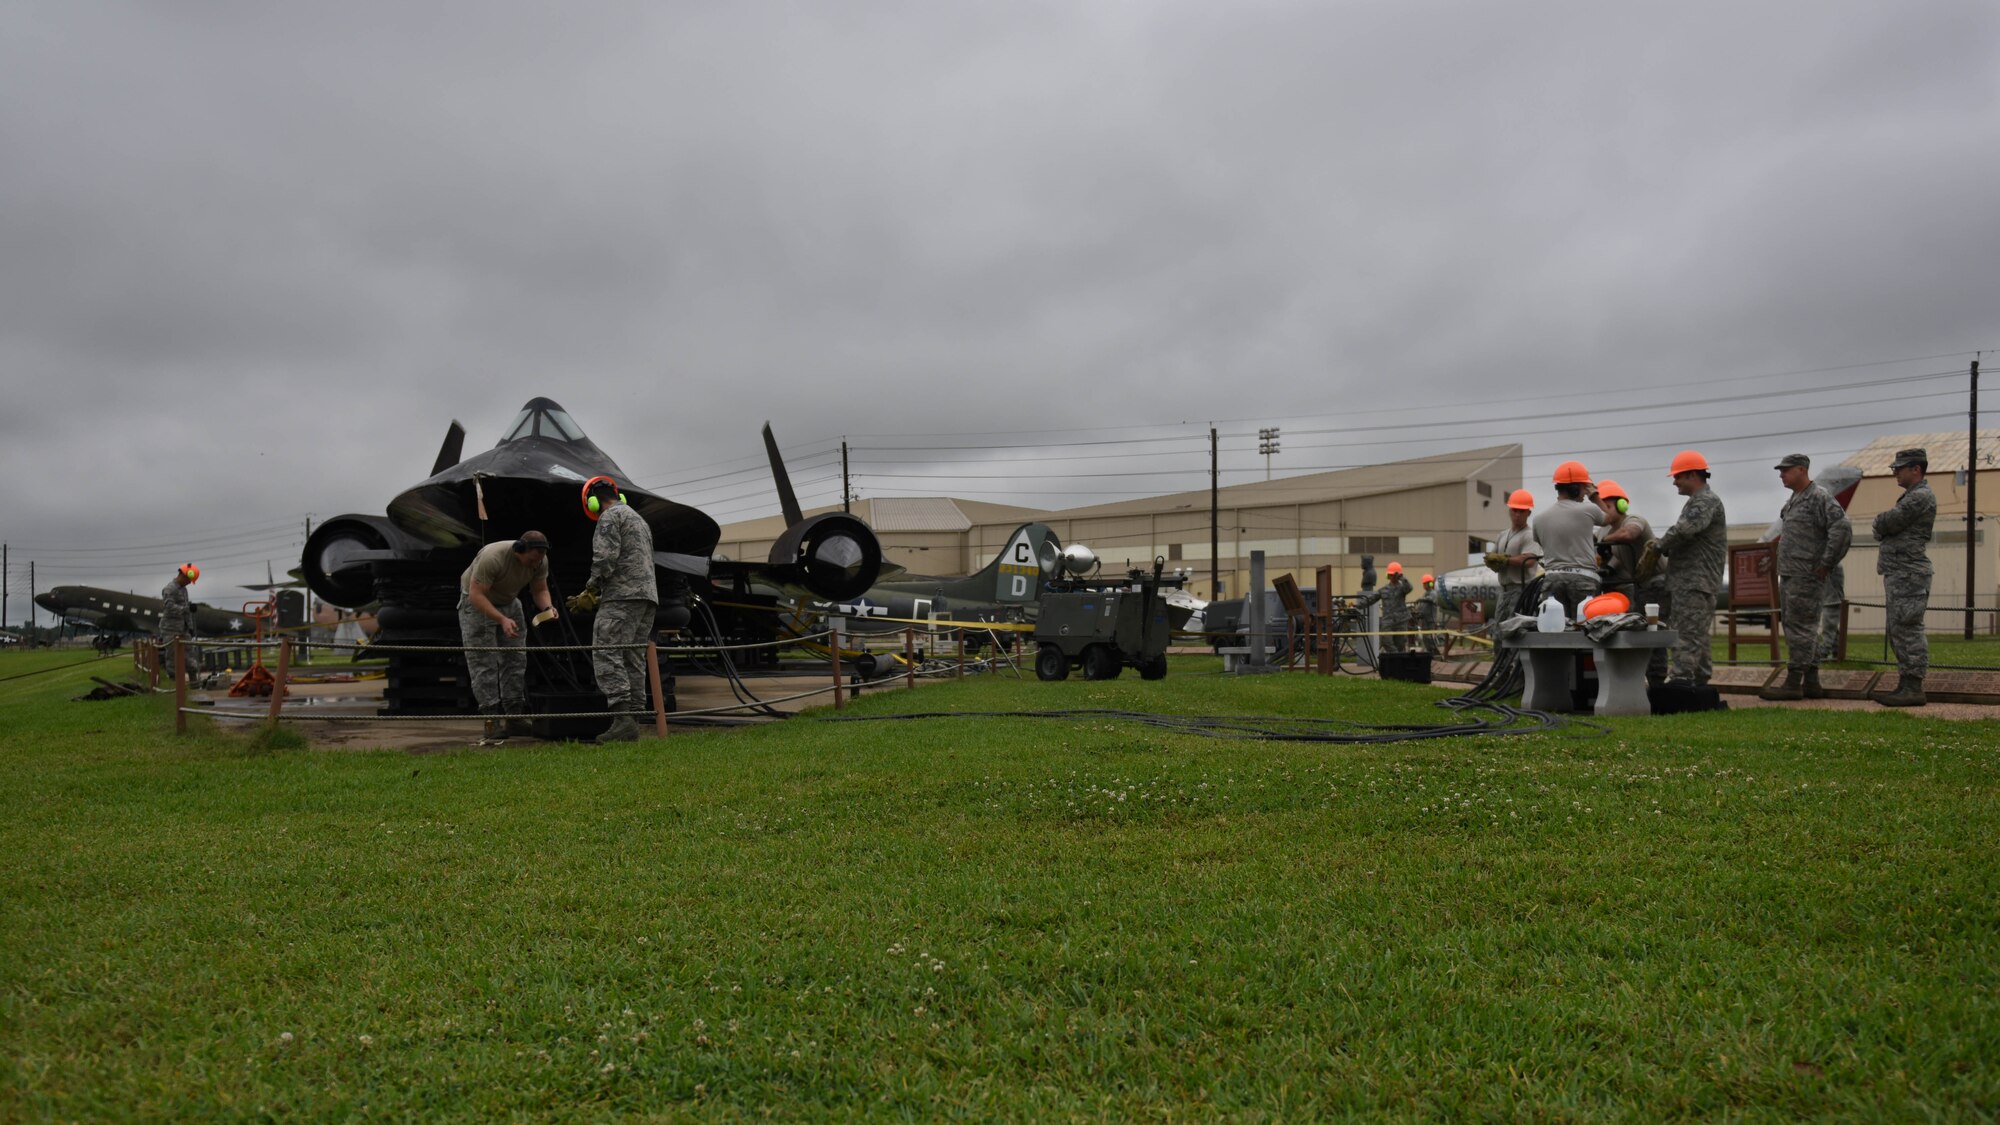 Members of 2nd Maintenance Group prepare to lift a static SR-71 Blackbird at the Global Air Power Museum at Barksdale Air Force Base, La. May 23, 2017. The 2nd Maintenance Squadron Repair and Reclamation Section was in charge the lift with assistance from various shops from the group. (U.S. Air Force photo/Airman 1st Class Stuart Bright)